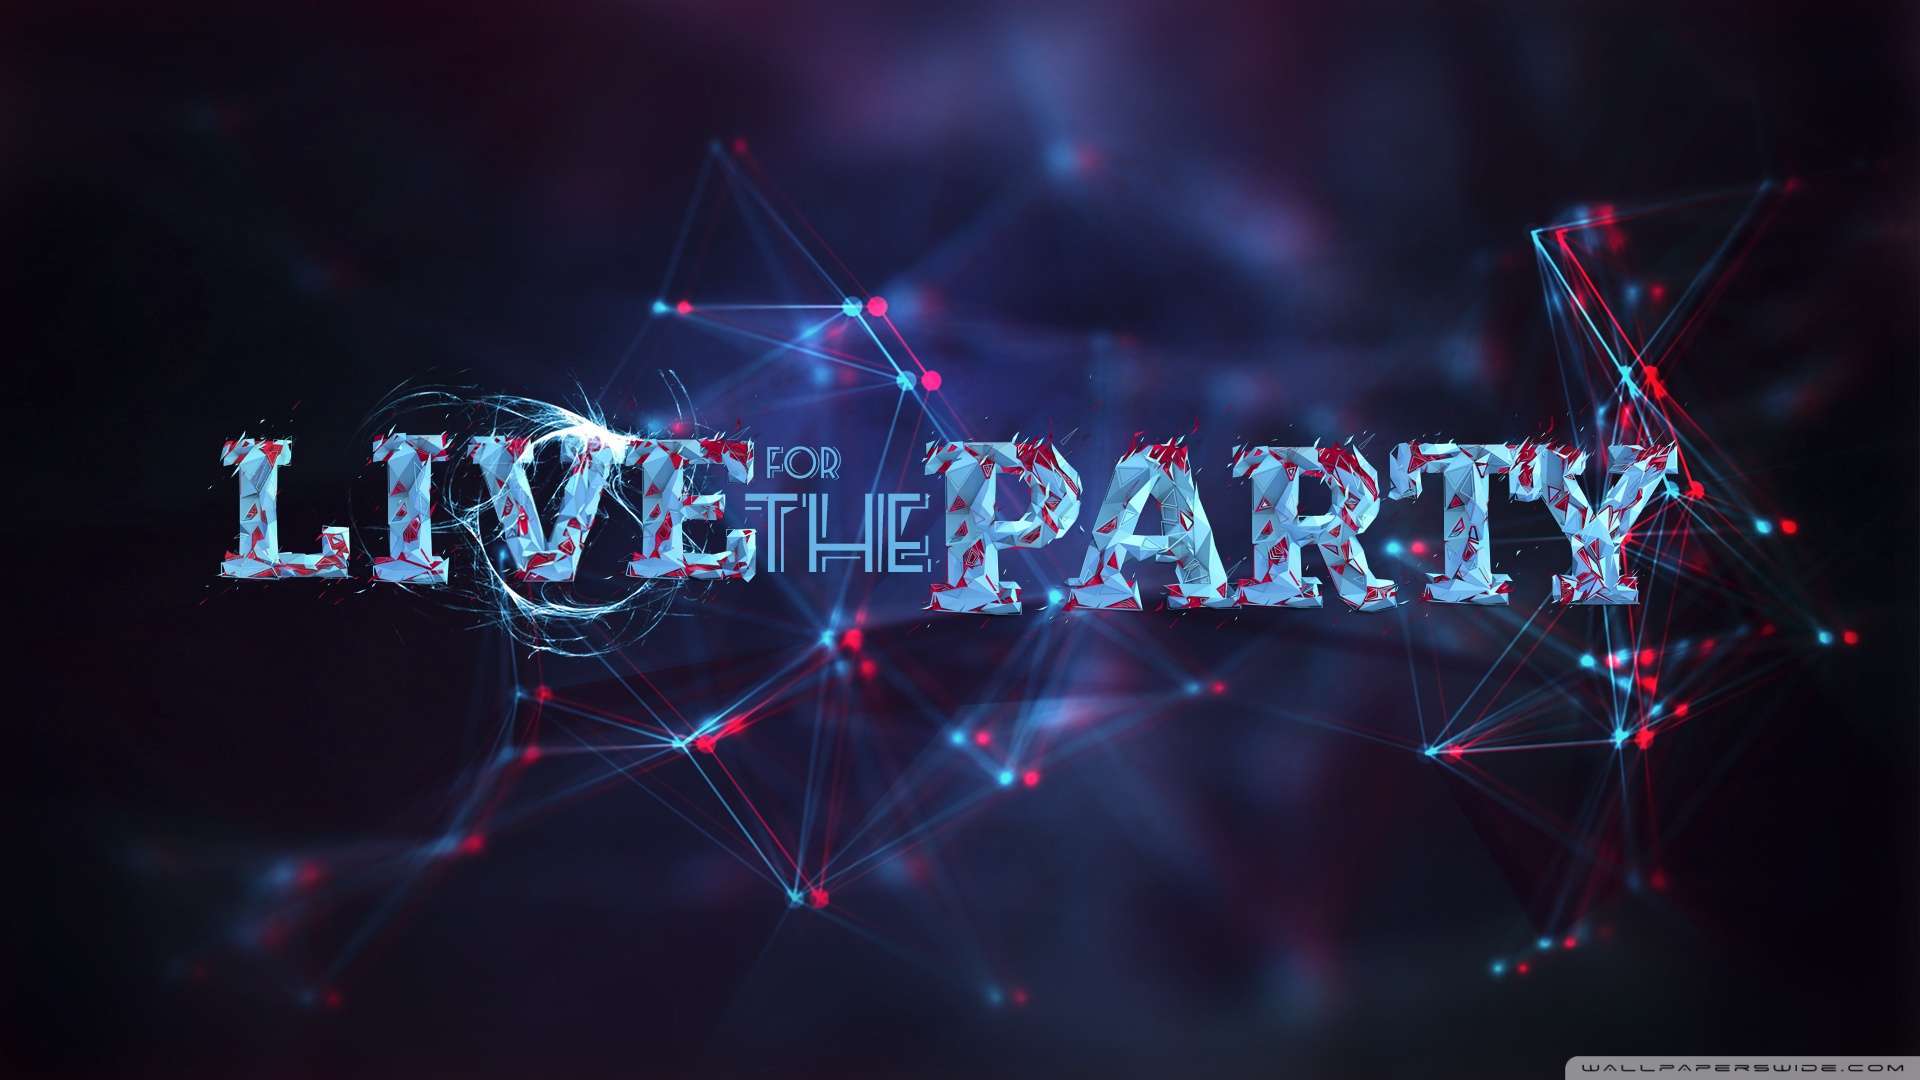 Wallpaper Live For The Party Wallpaper 1080p HD Upload at February